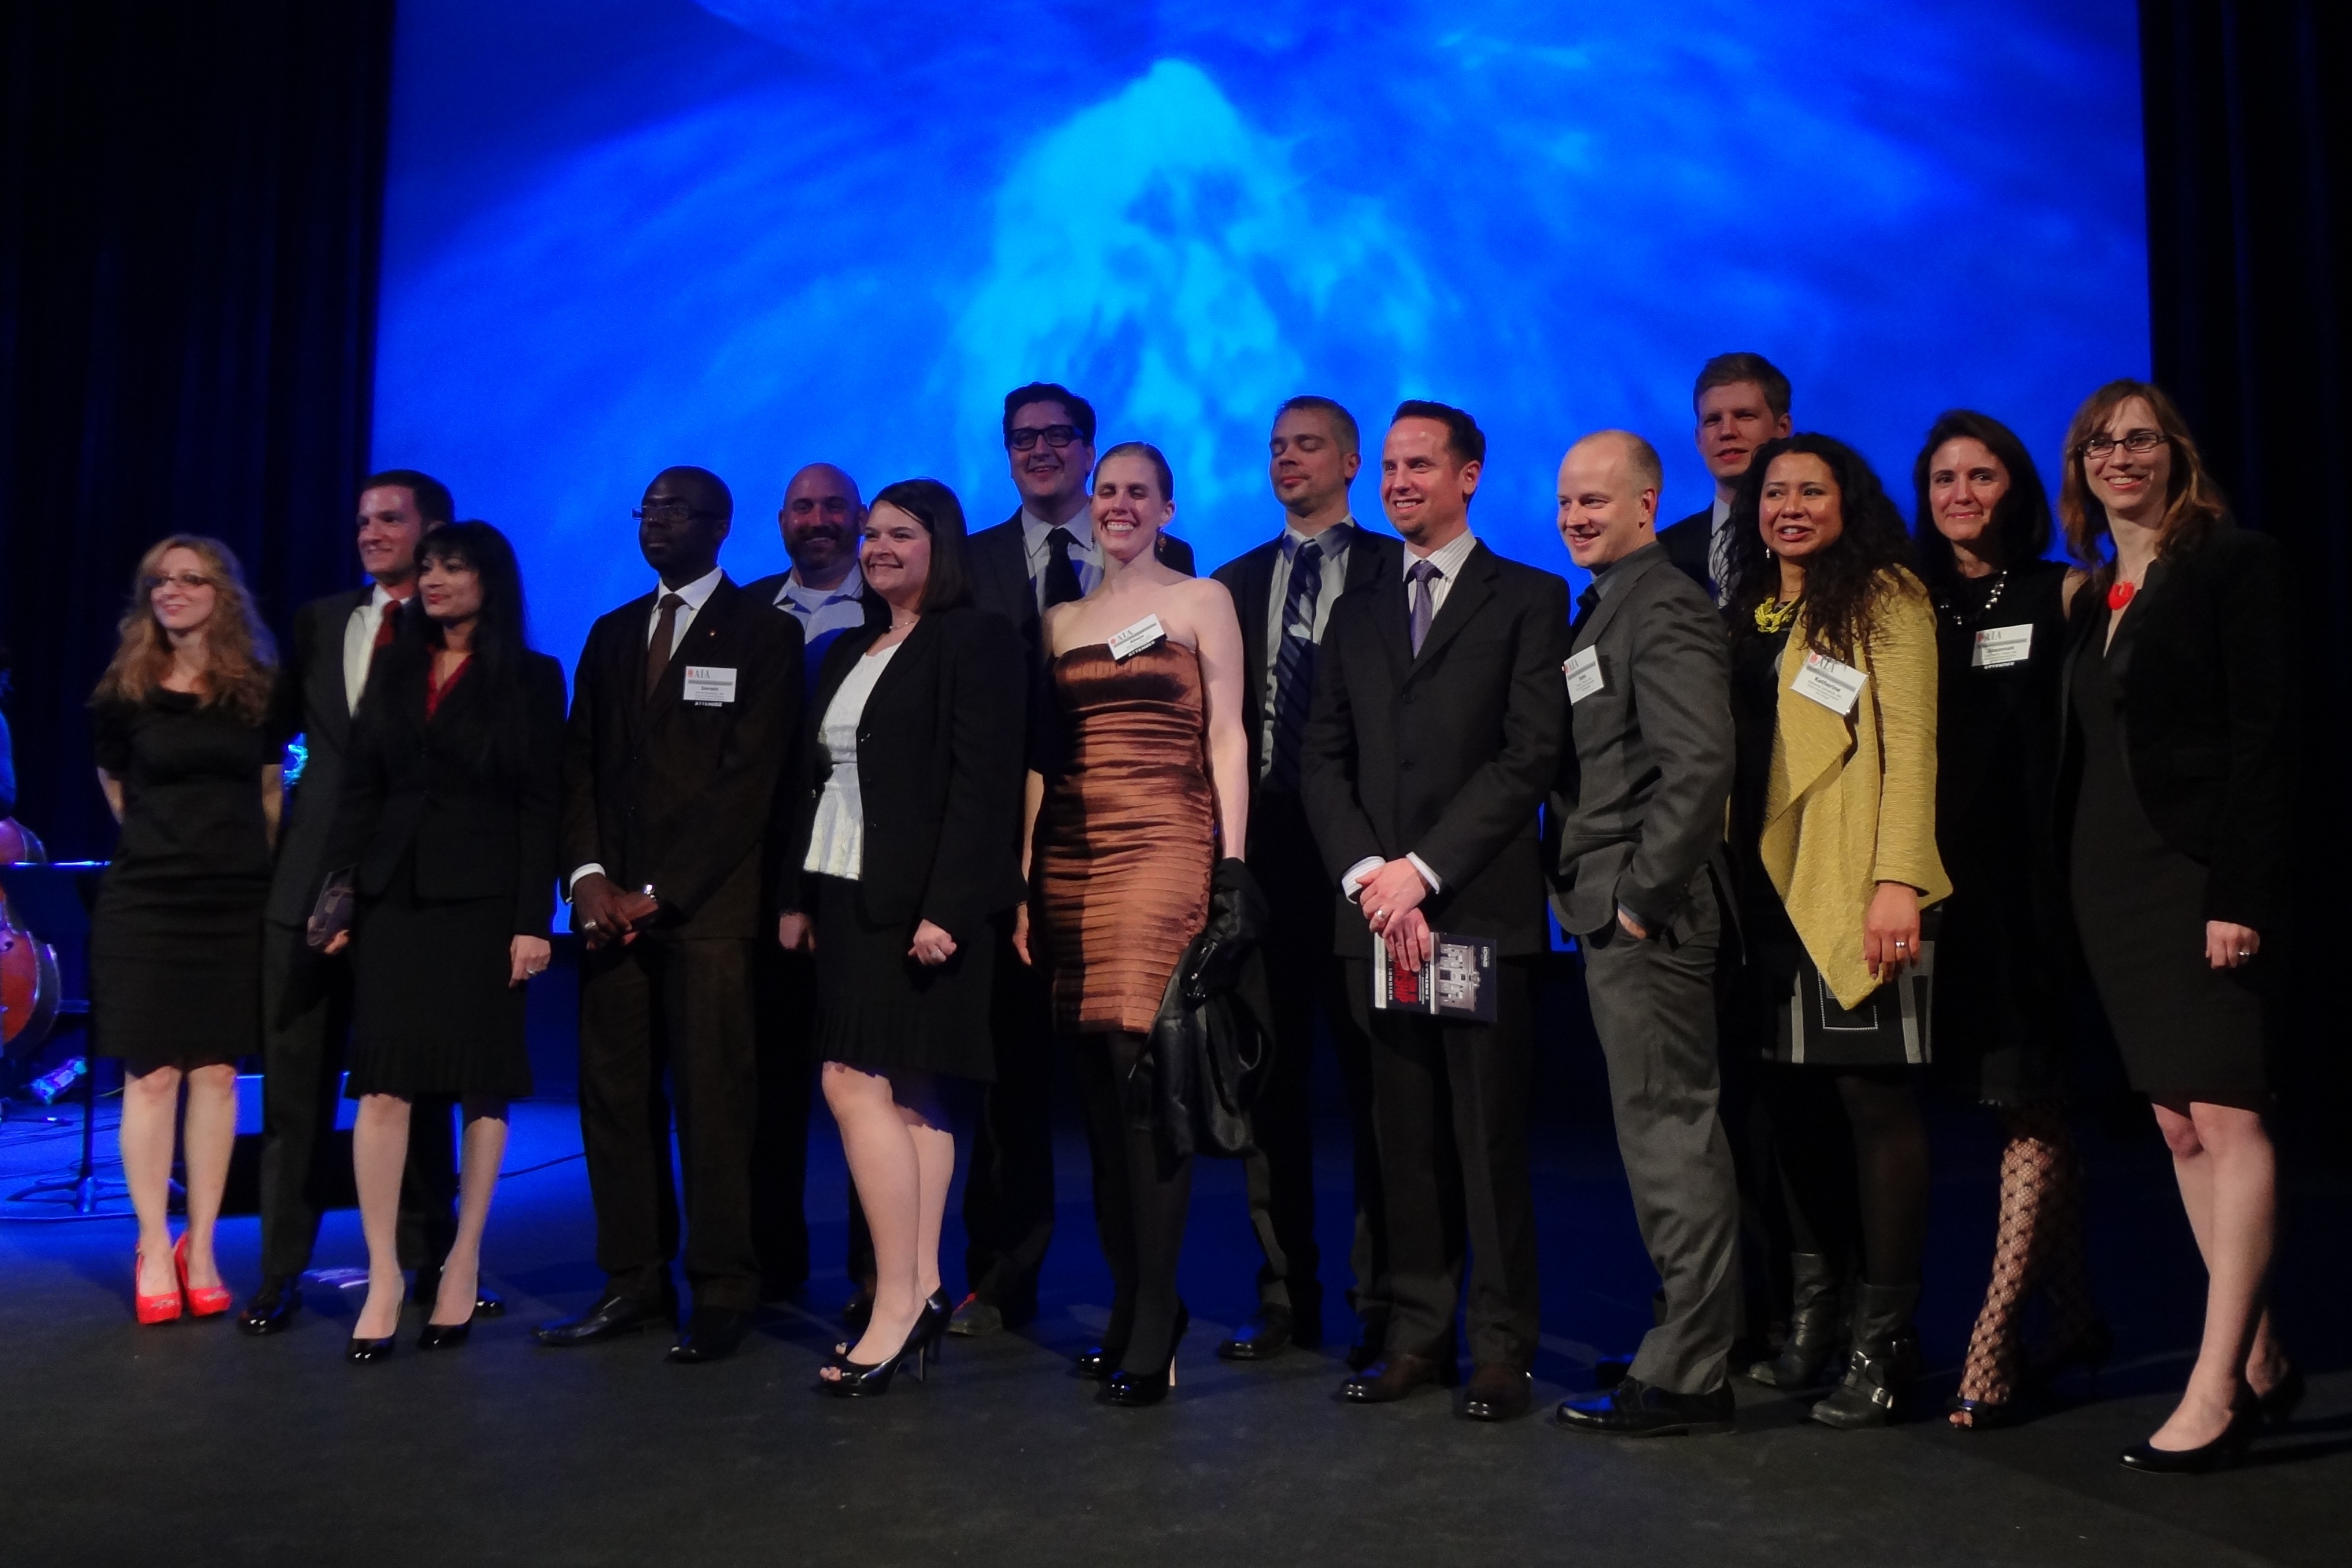 New Yorkers Earn National AIA Recognition at 2013 Grassroots